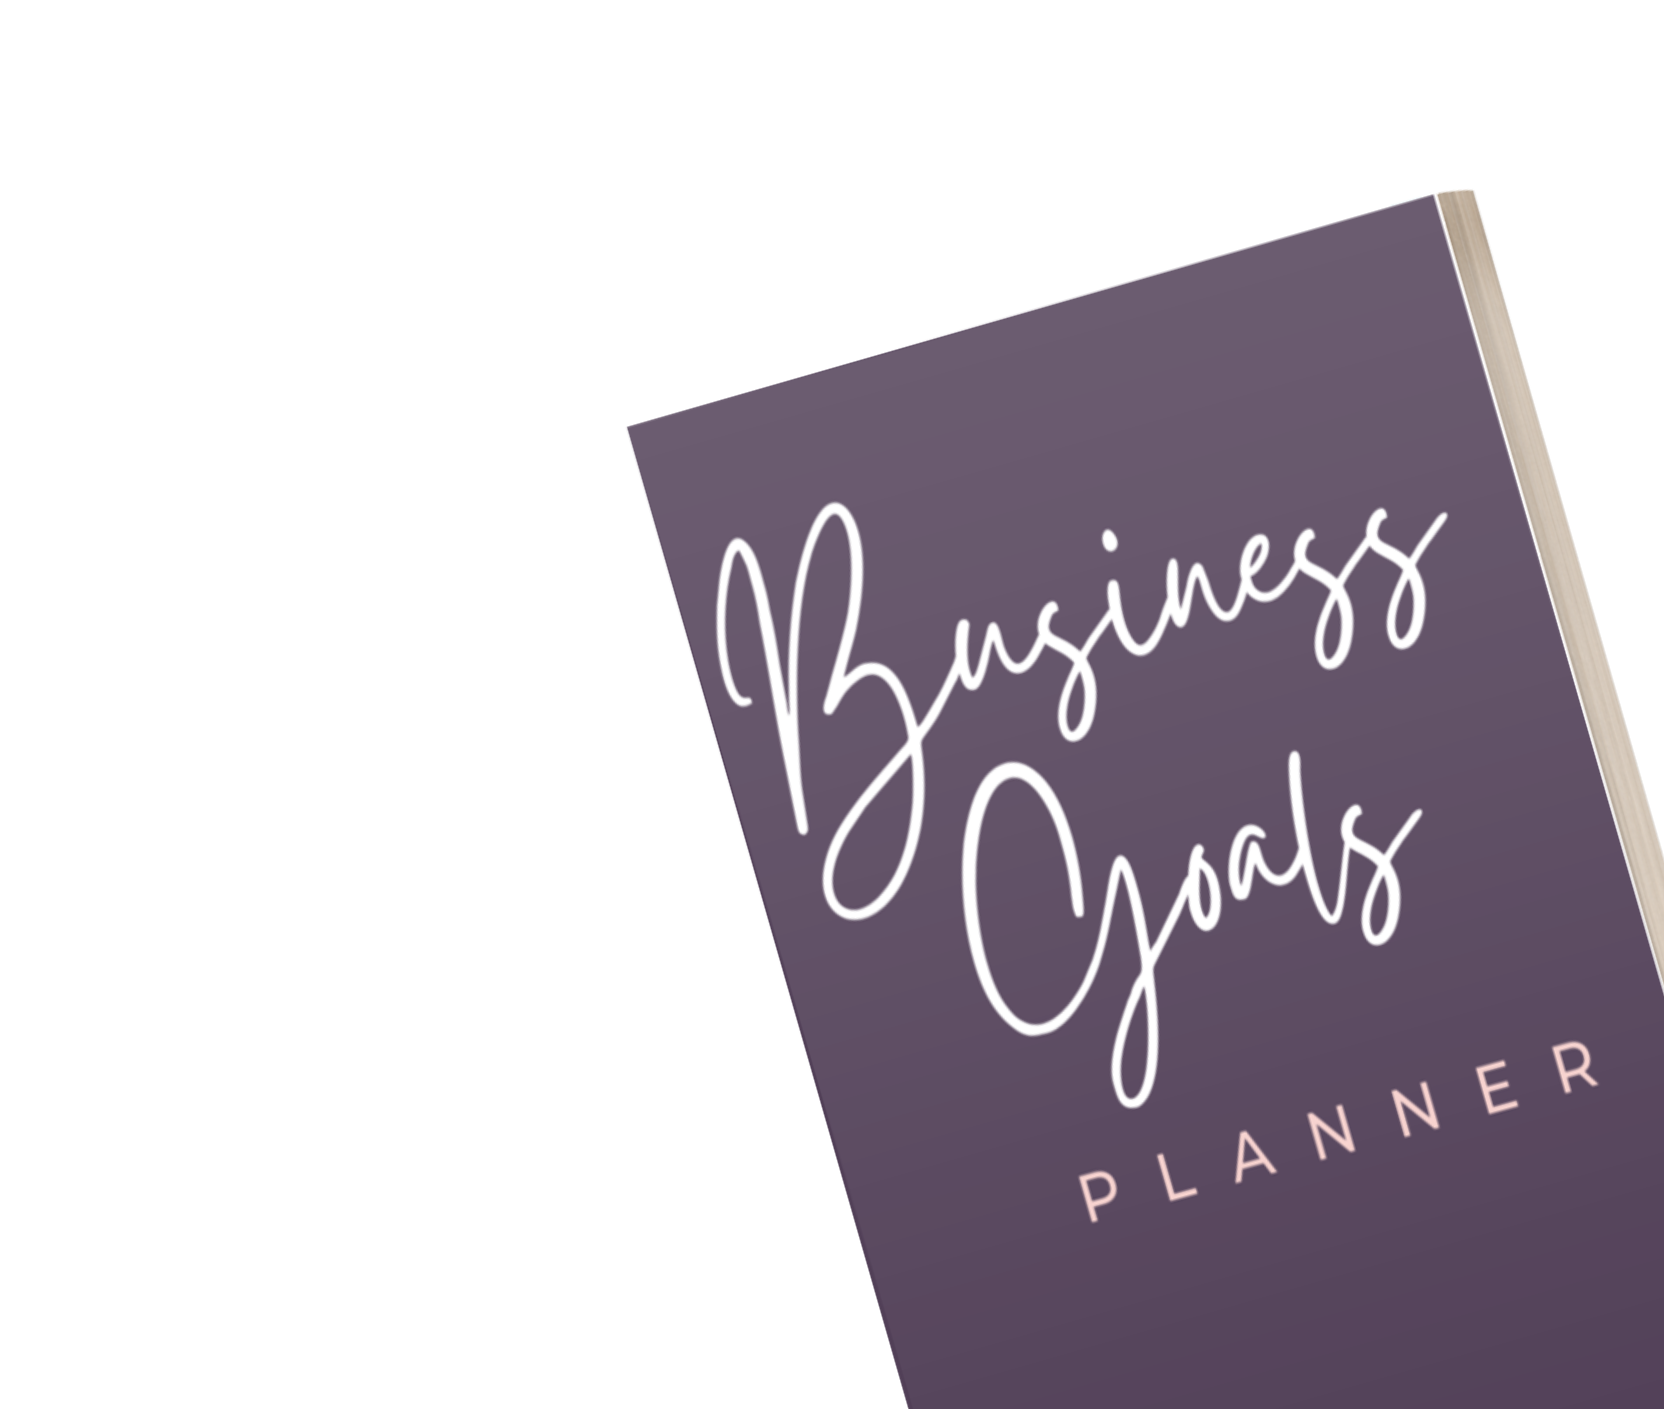 Business Goals Planner - Done For Your Toolbox